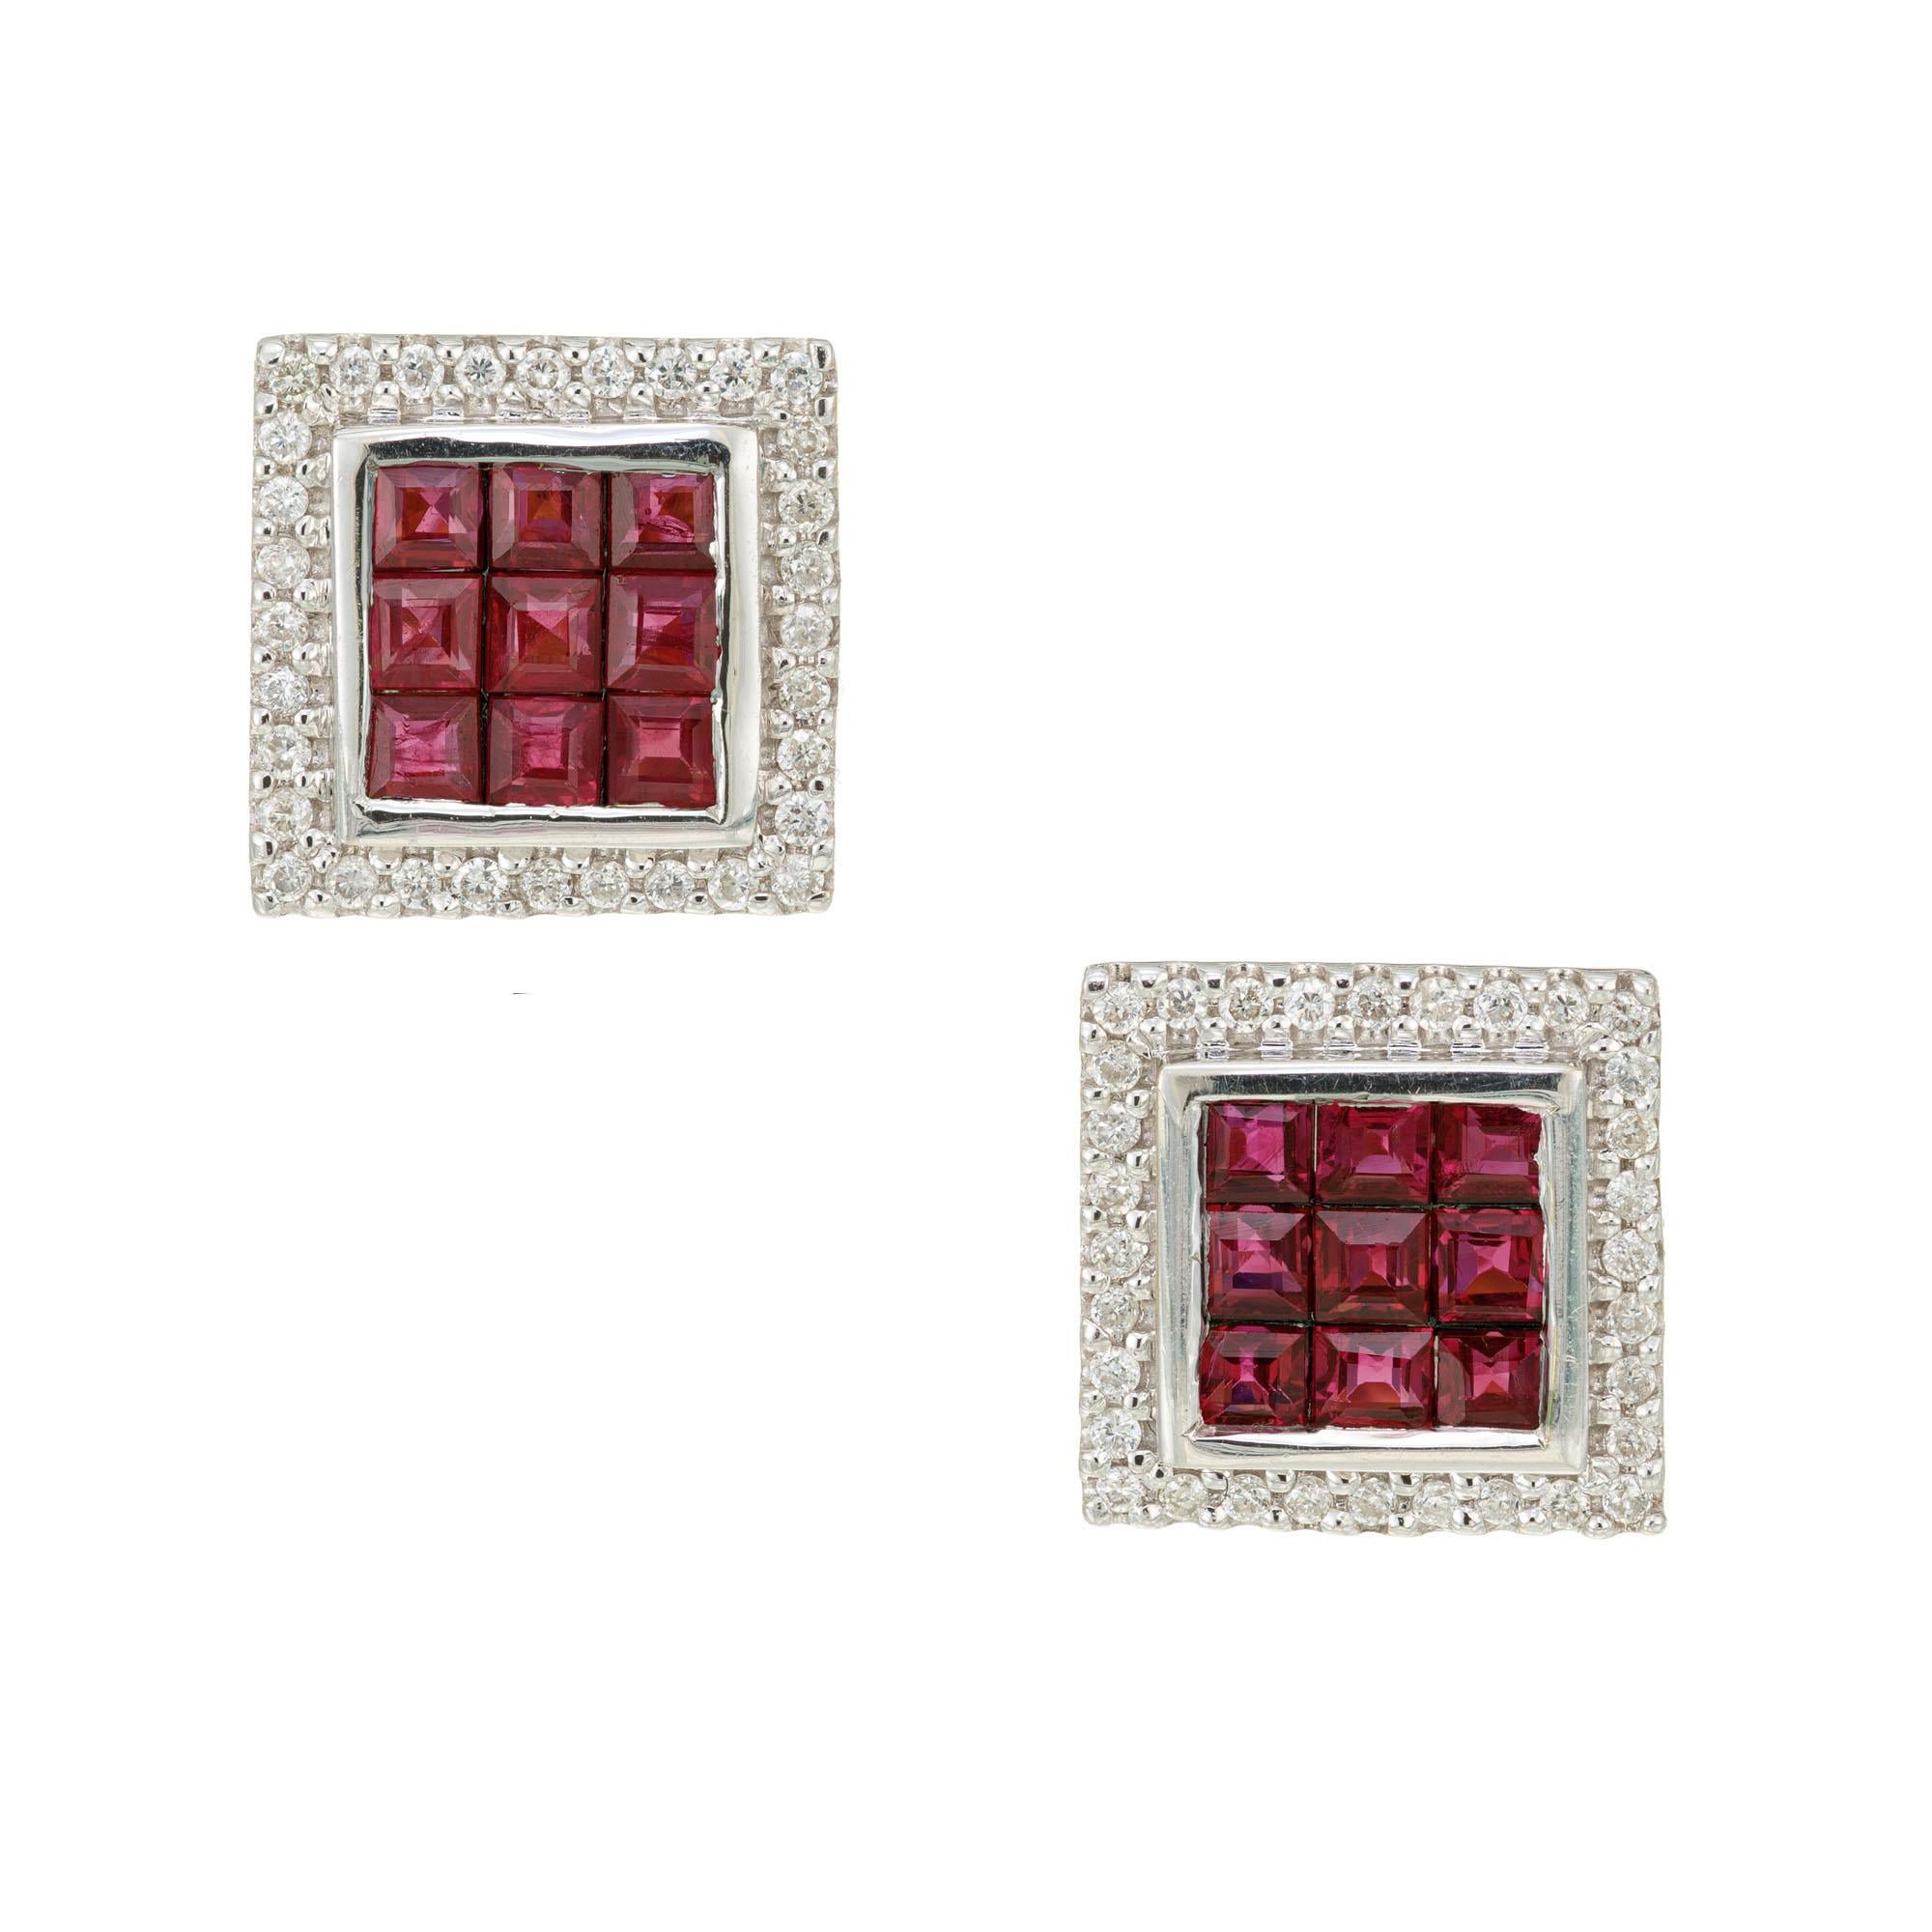 Ruby and diamond earrings. 18 invisible set square ruby rubies with round cut diamond halos set in 18k white gold square settings with 18k yellow gold posts and 18k yellow gold friction backs.

18 square cut Rubies, approx. total weight .90cts,